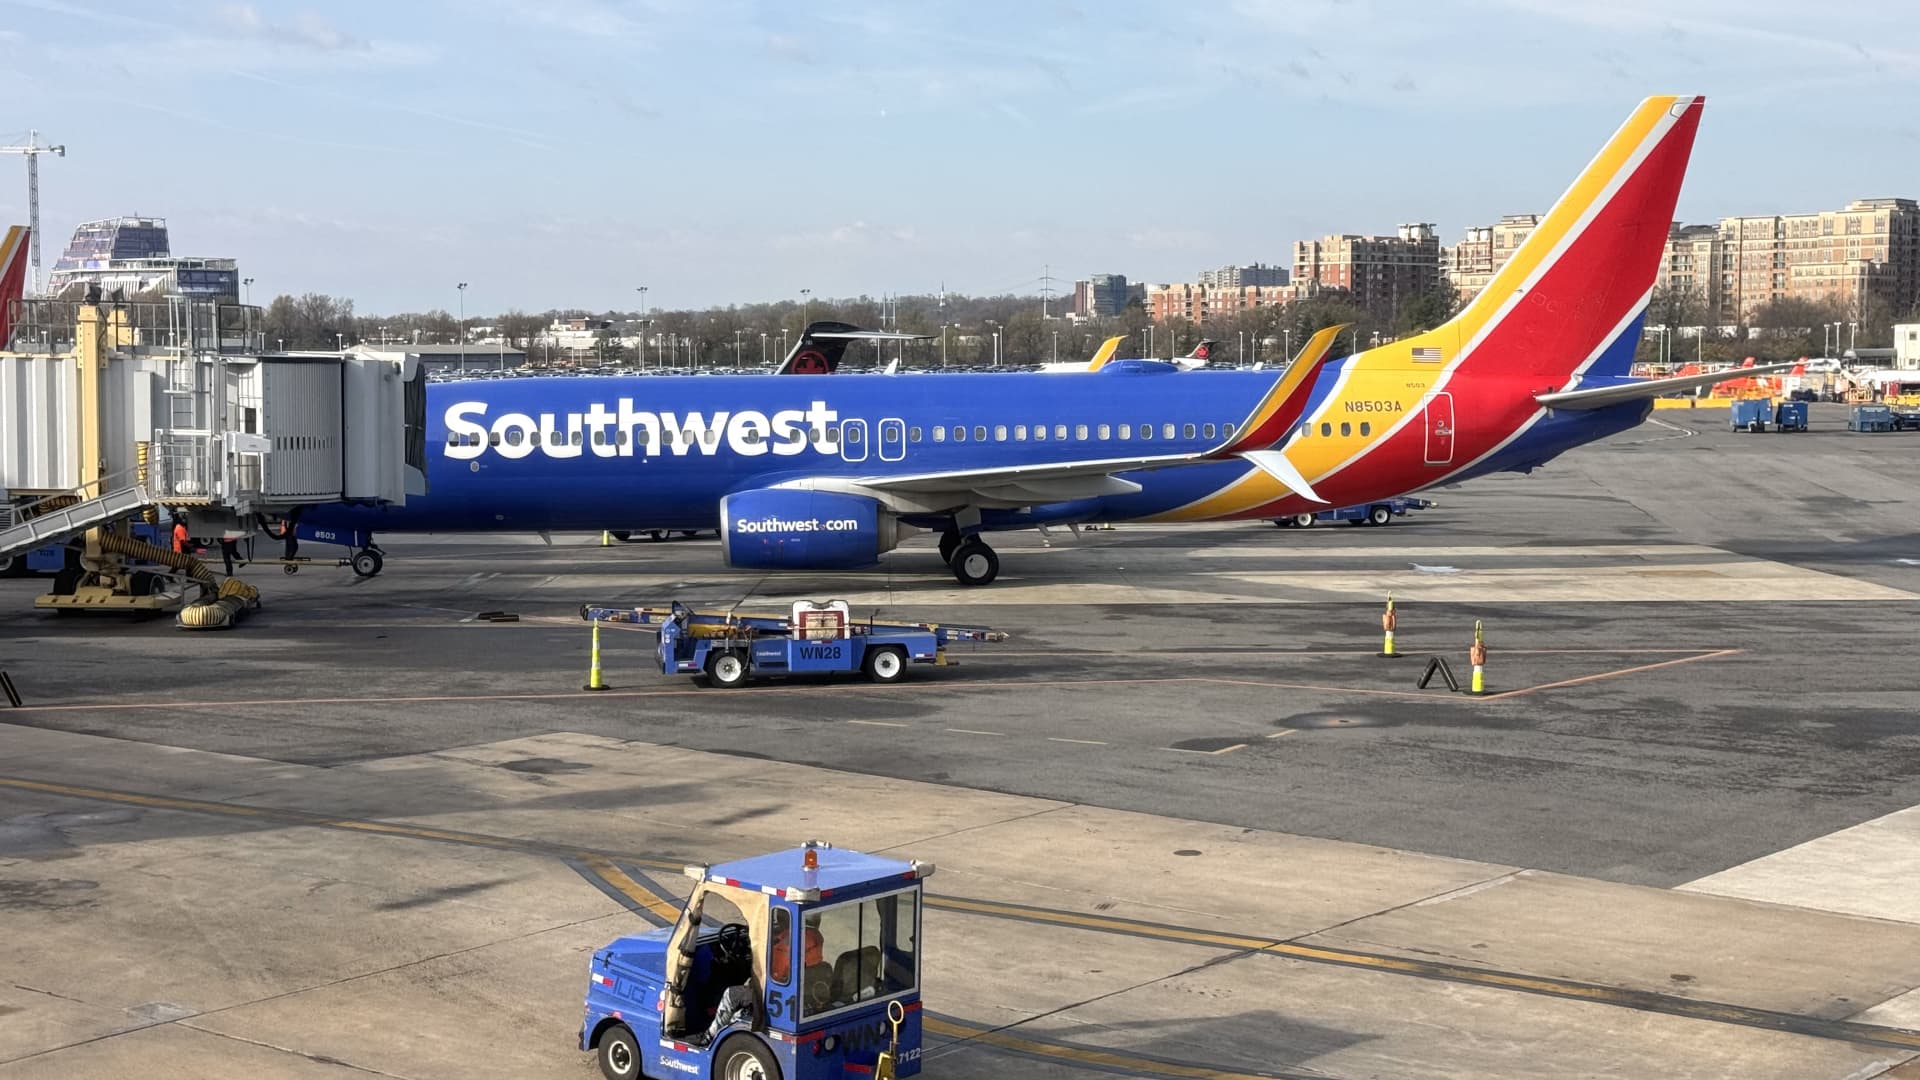 FAA probes latest Southwest Airlines flight that posed safety issues